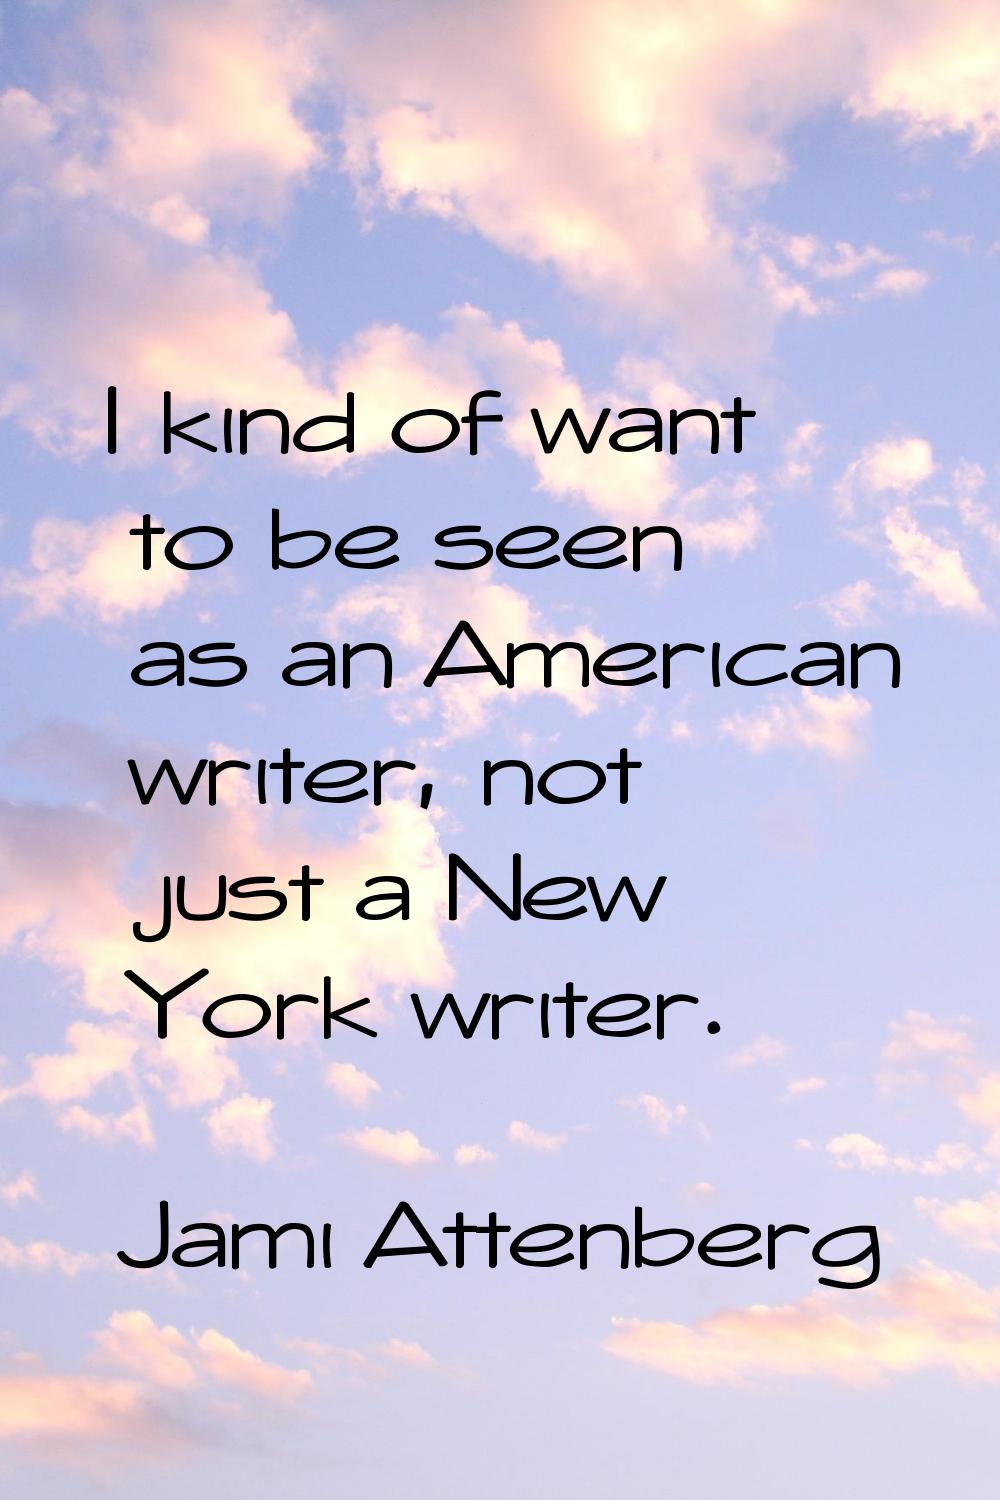 I kind of want to be seen as an American writer, not just a New York writer.